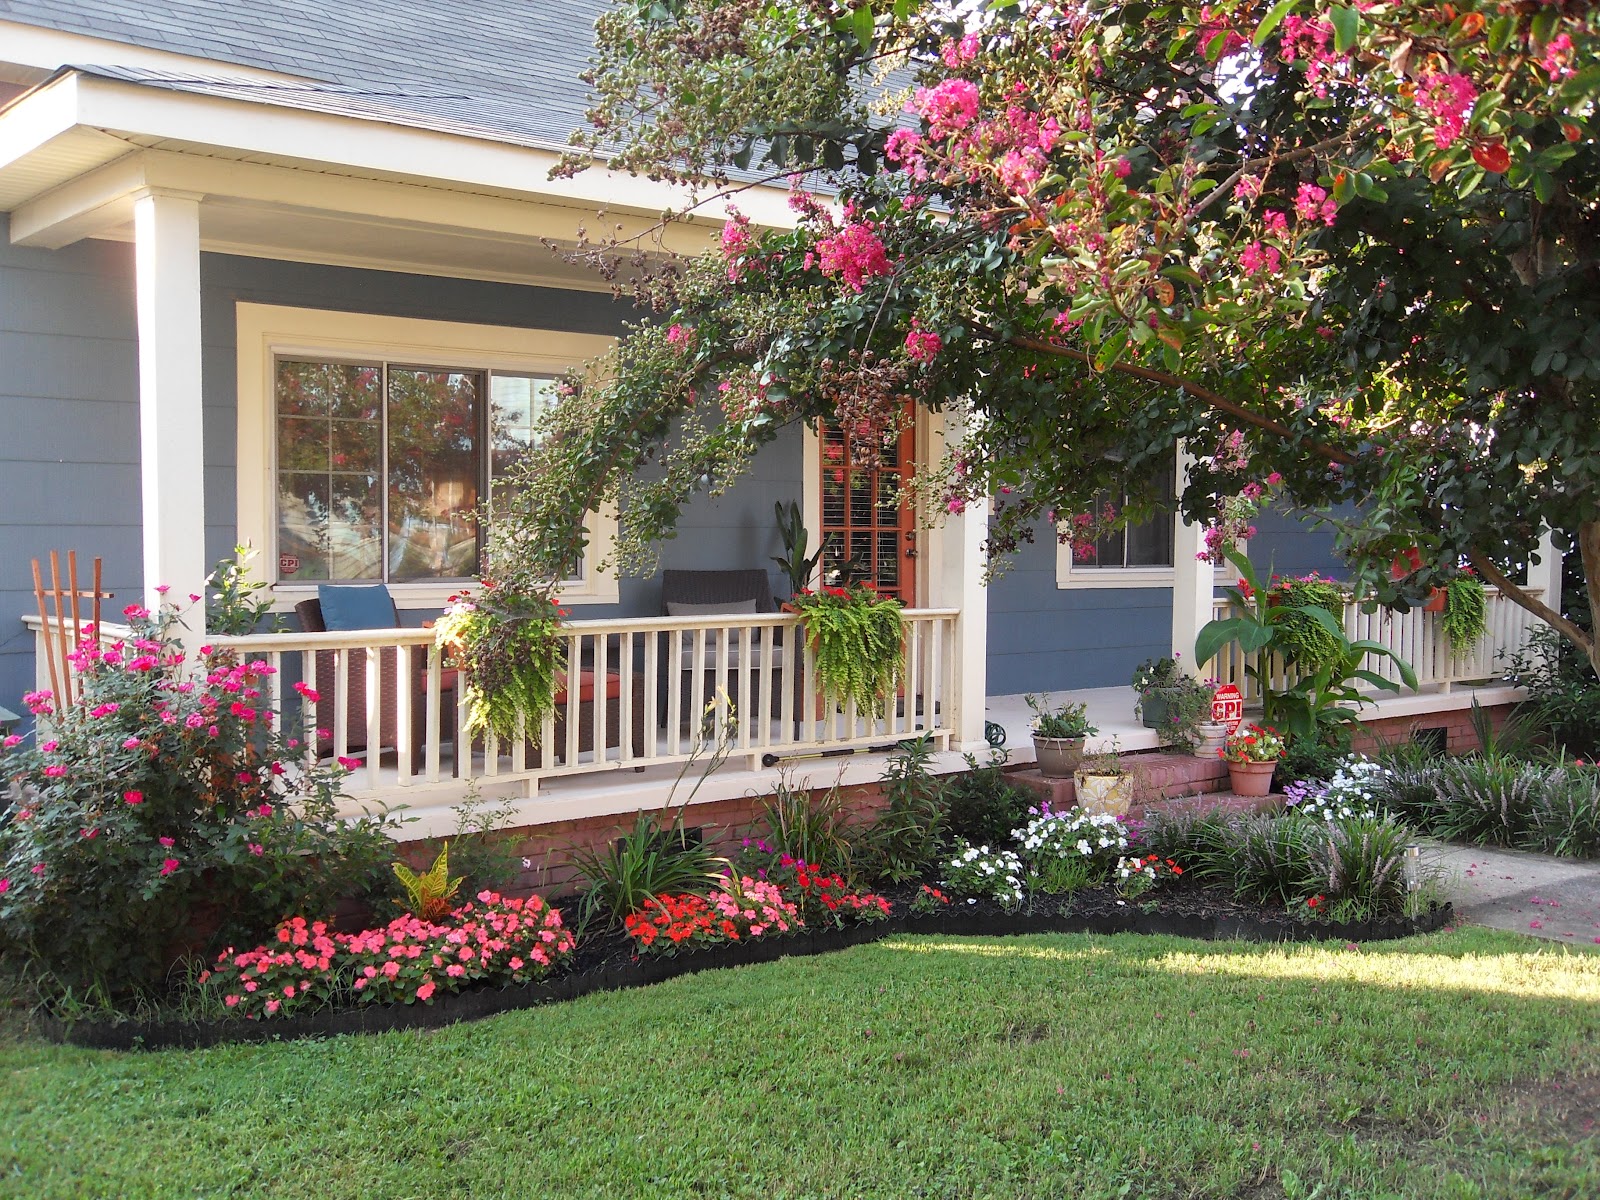 Front Yard Design for Ranch Style Homes | HomesFeed